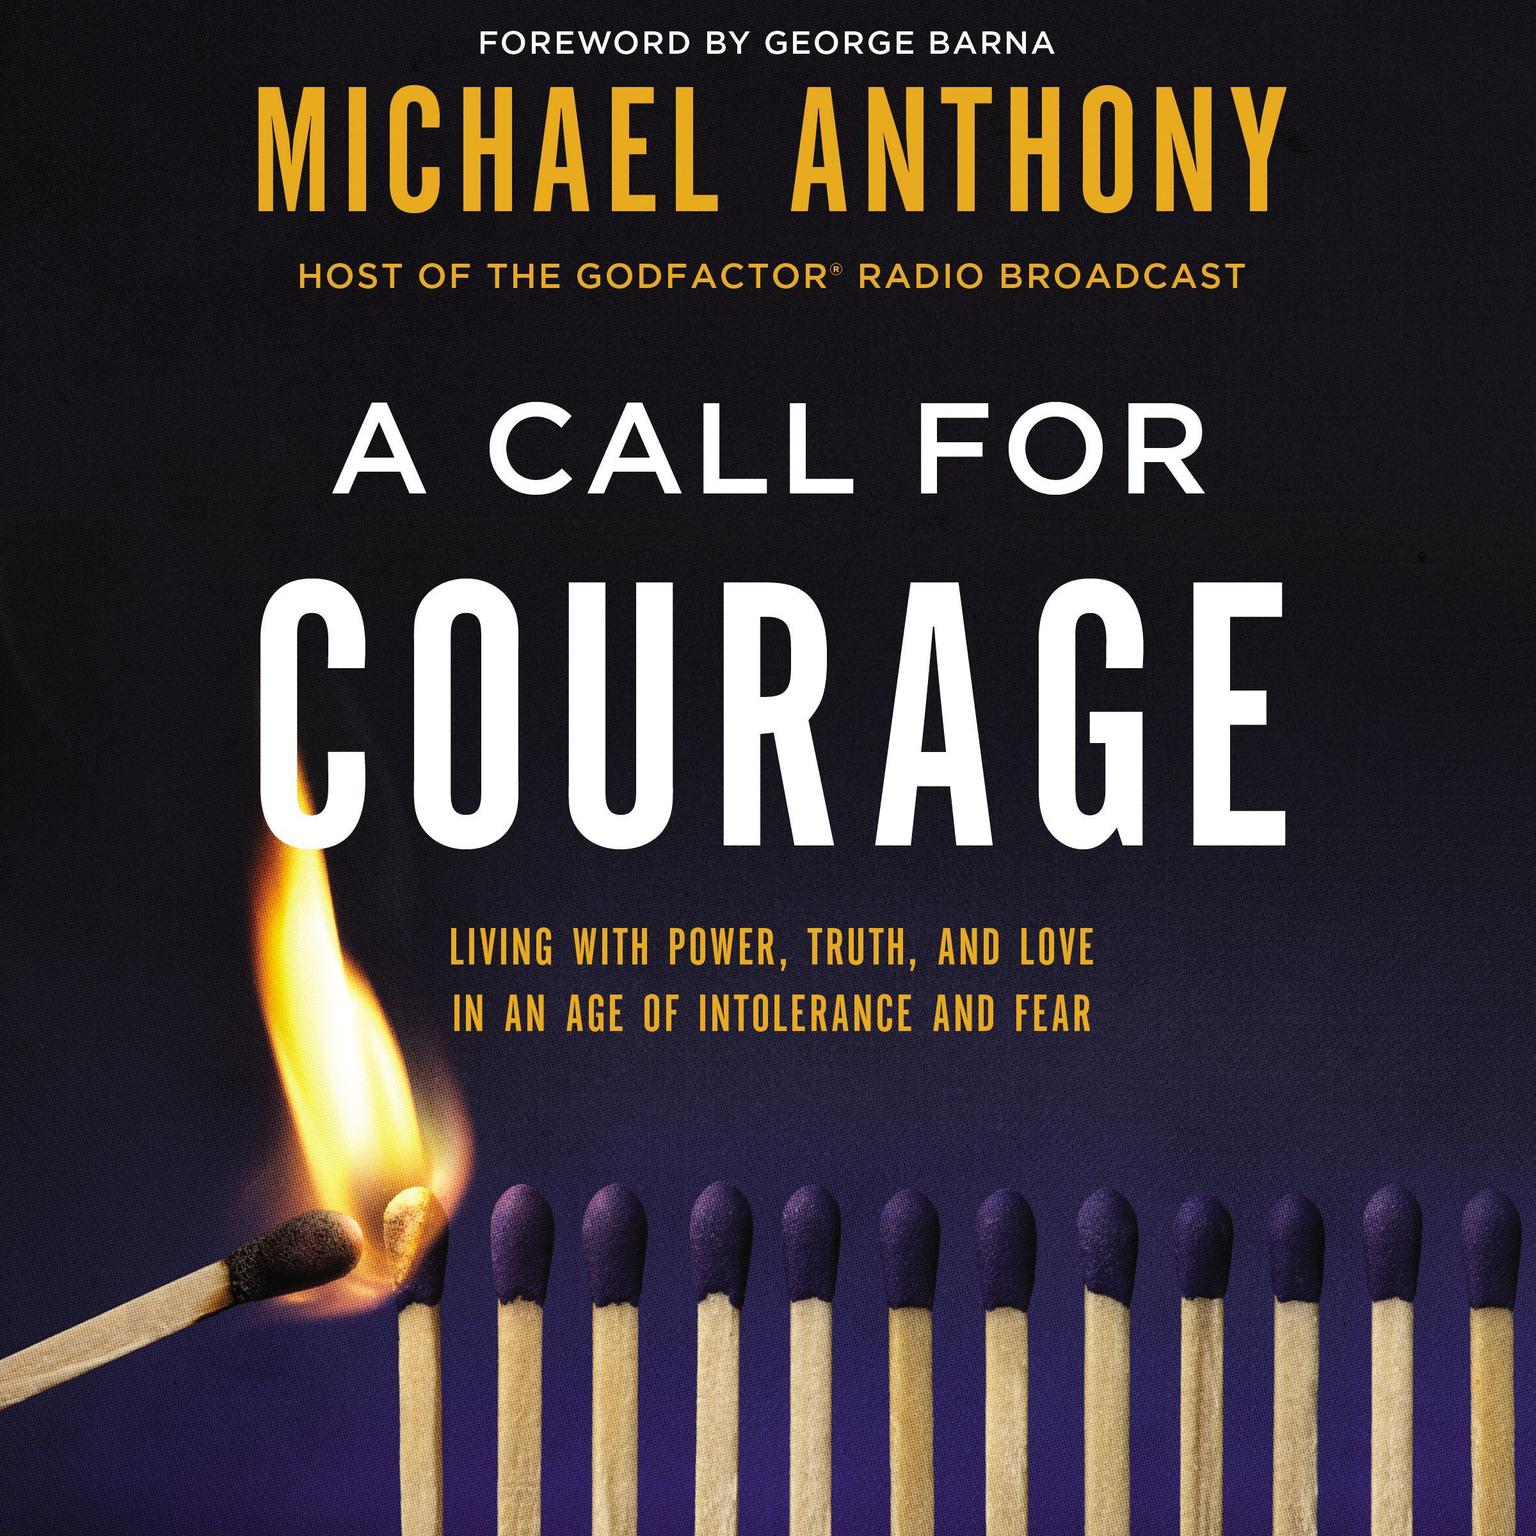 A Call for Courage: Living with Power, Truth, and Love in an Age of Intolerance and Fear Audiobook, by Michael Anthony